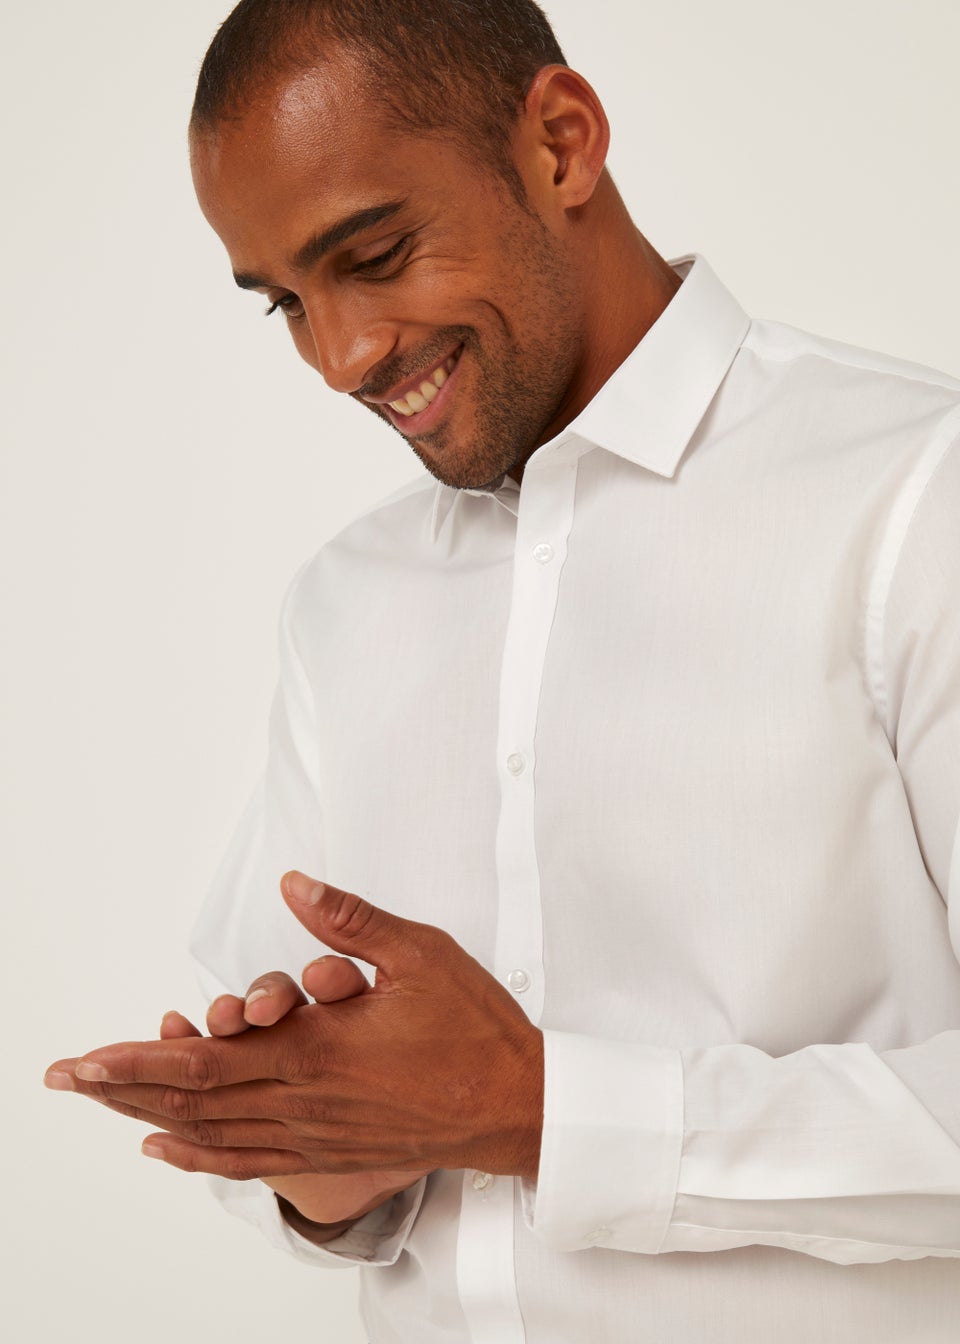 Taylor & Wright 3 Pack White Easy Care Slim Fit Shirts